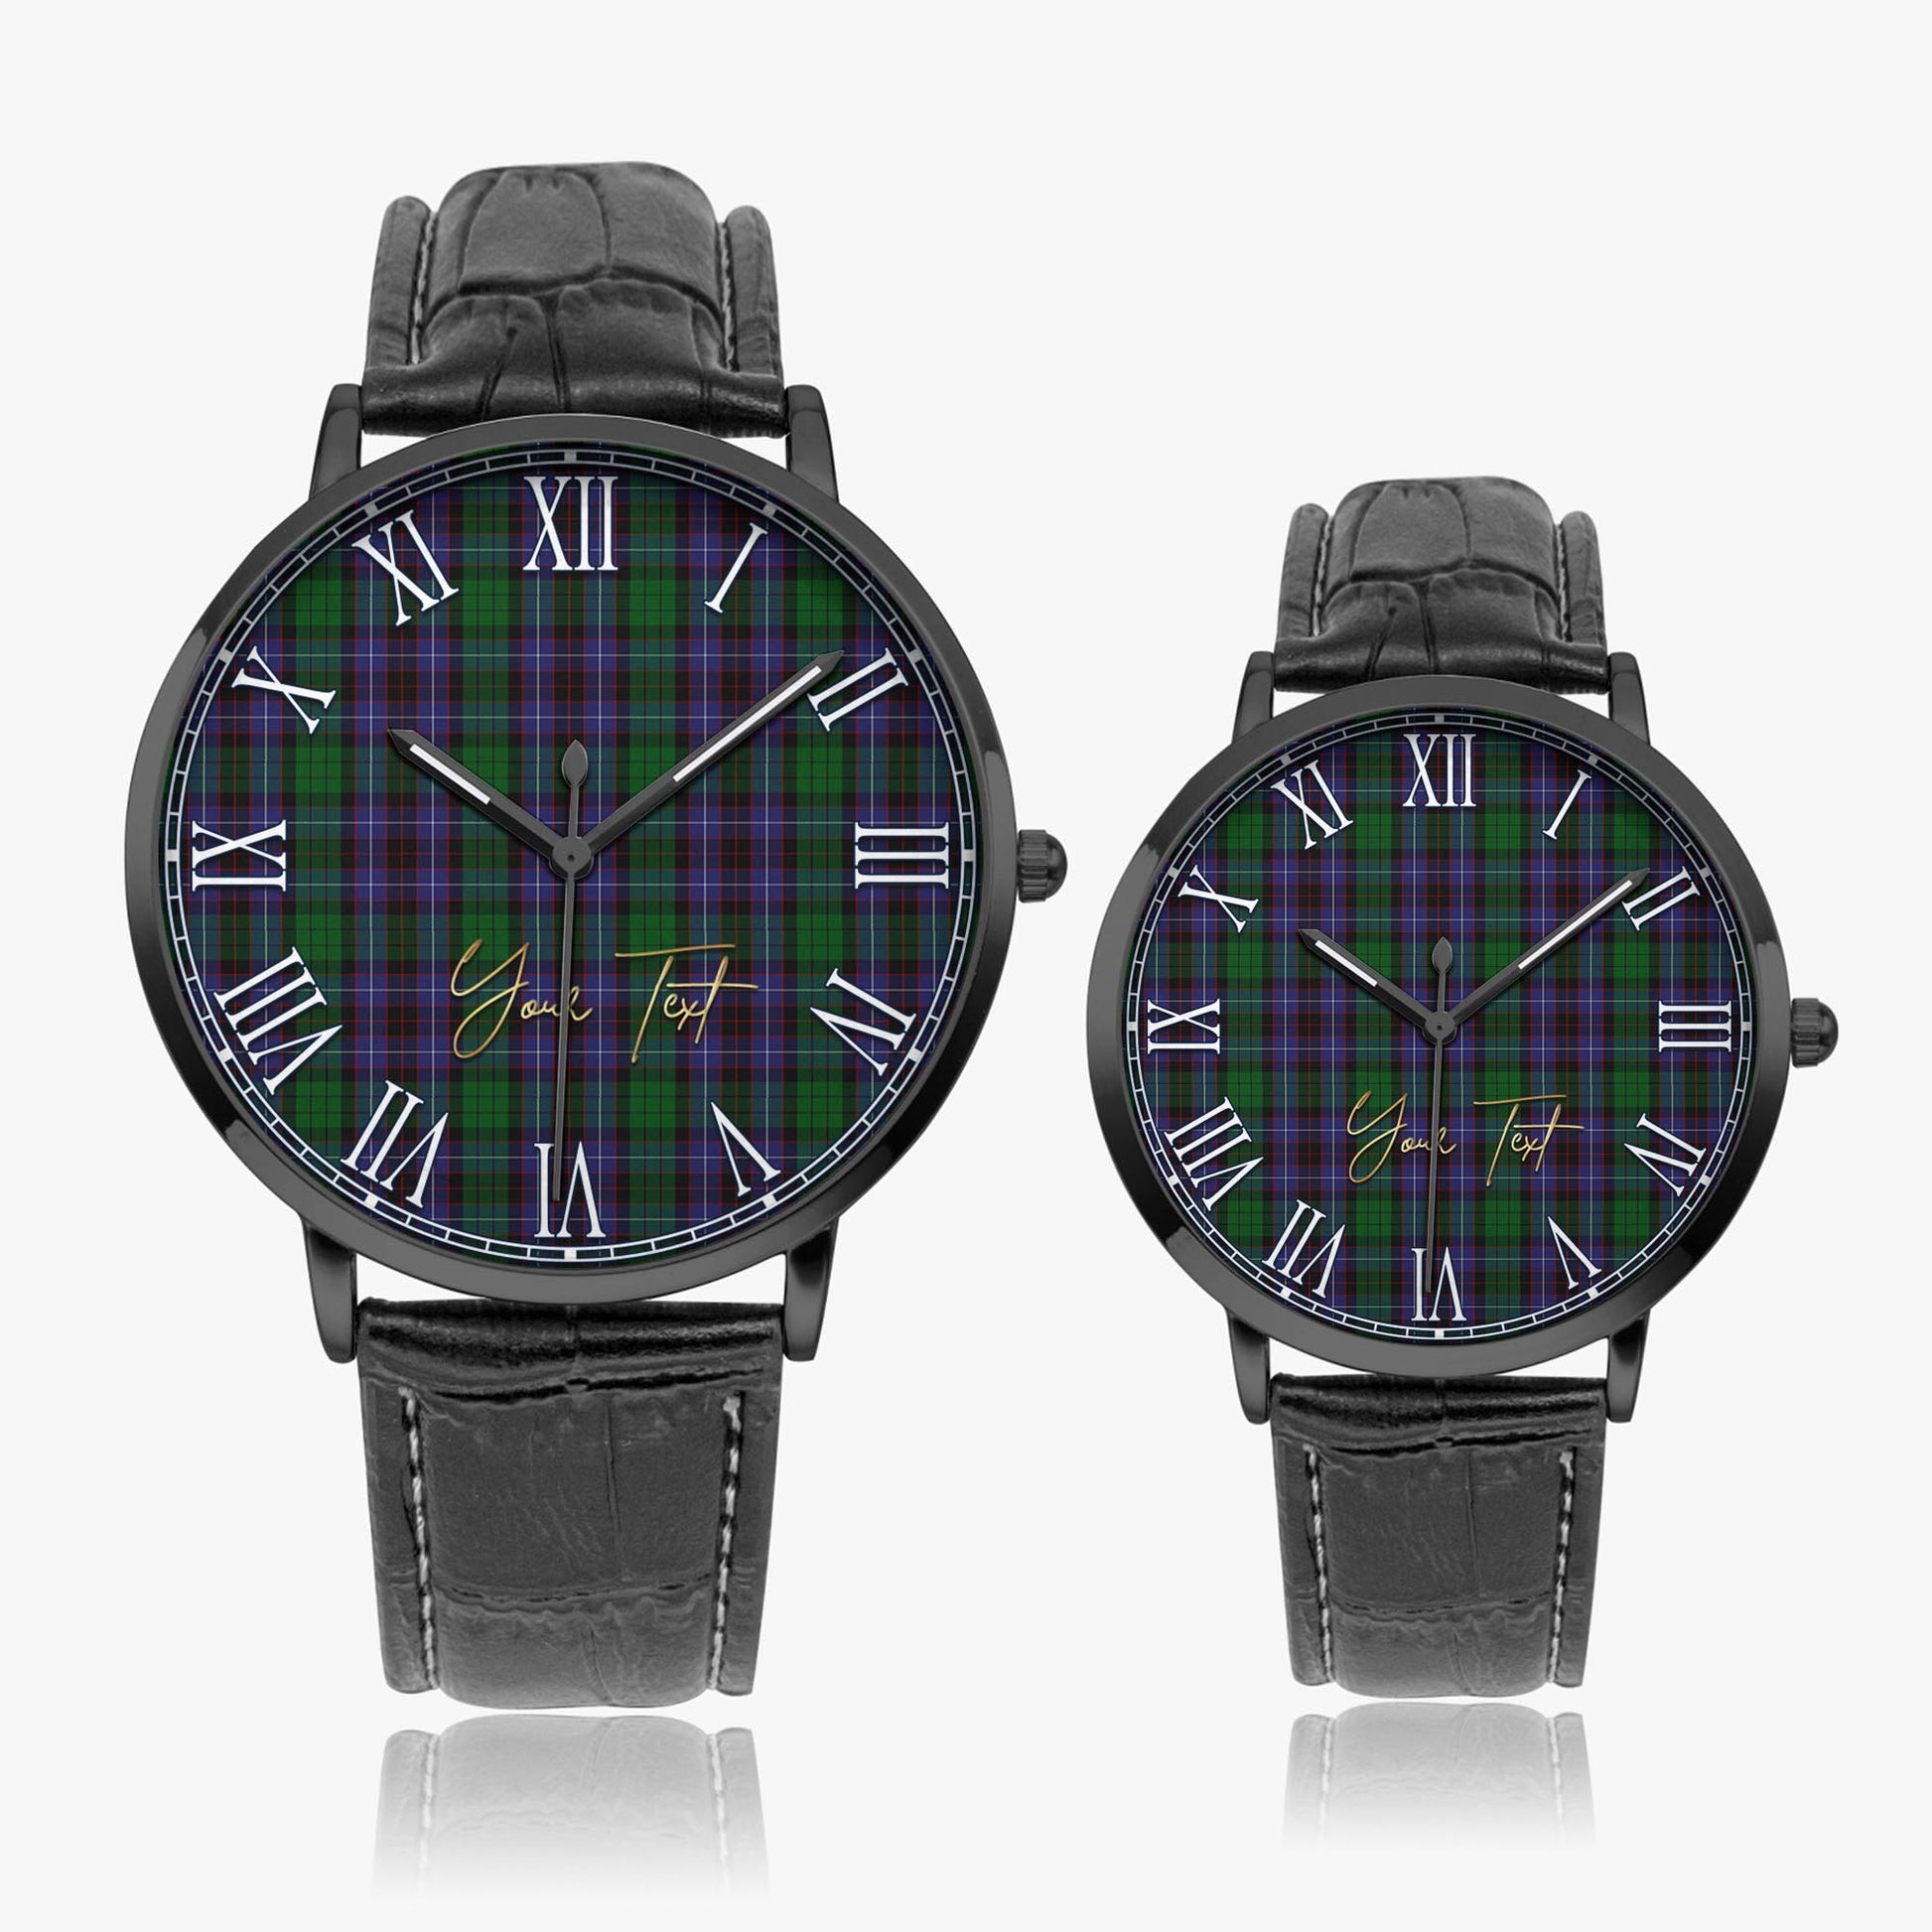 Hunter of Peebleshire Tartan Personalized Your Text Leather Trap Quartz Watch Ultra Thin Black Case With Black Leather Strap - Tartanvibesclothing